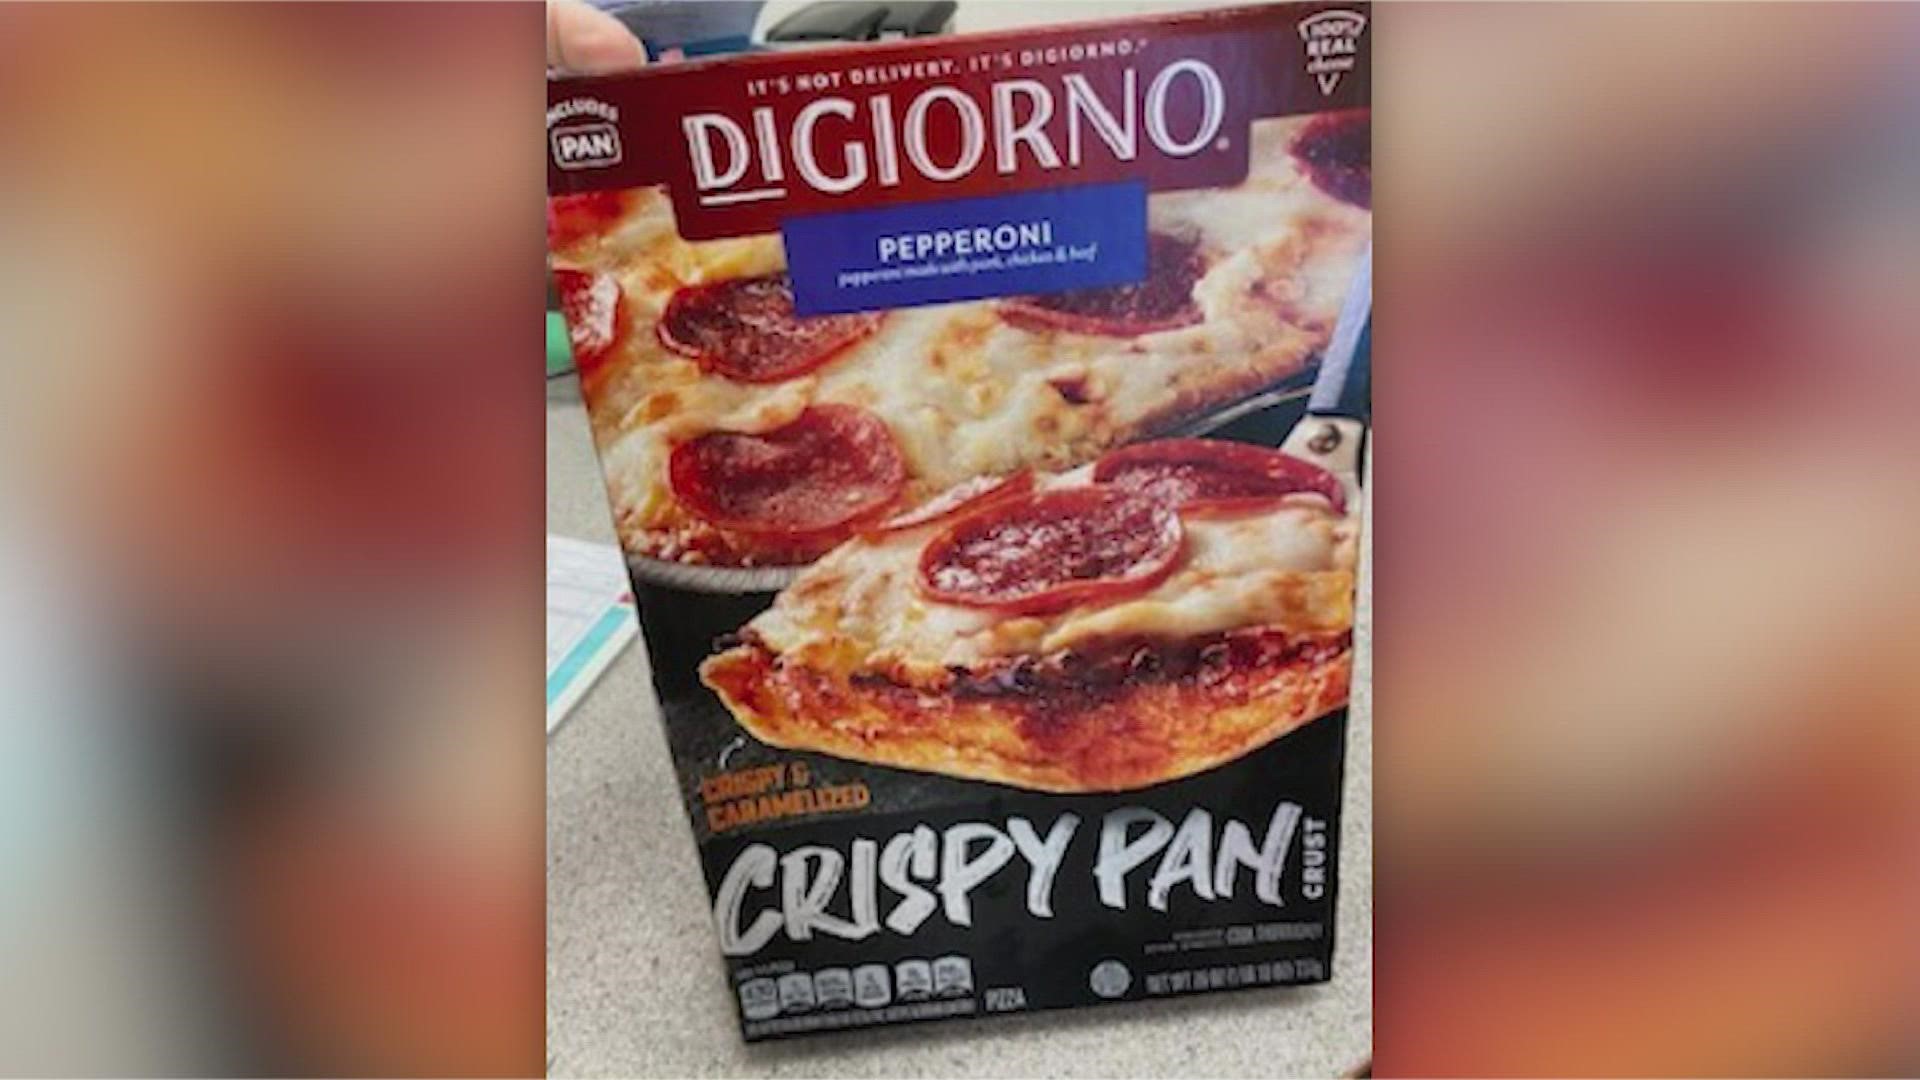 Nestle is recalling about 28,000 boxes of DiGiorno products because of a dangerous labeling error. So far, no one has reported any illness.